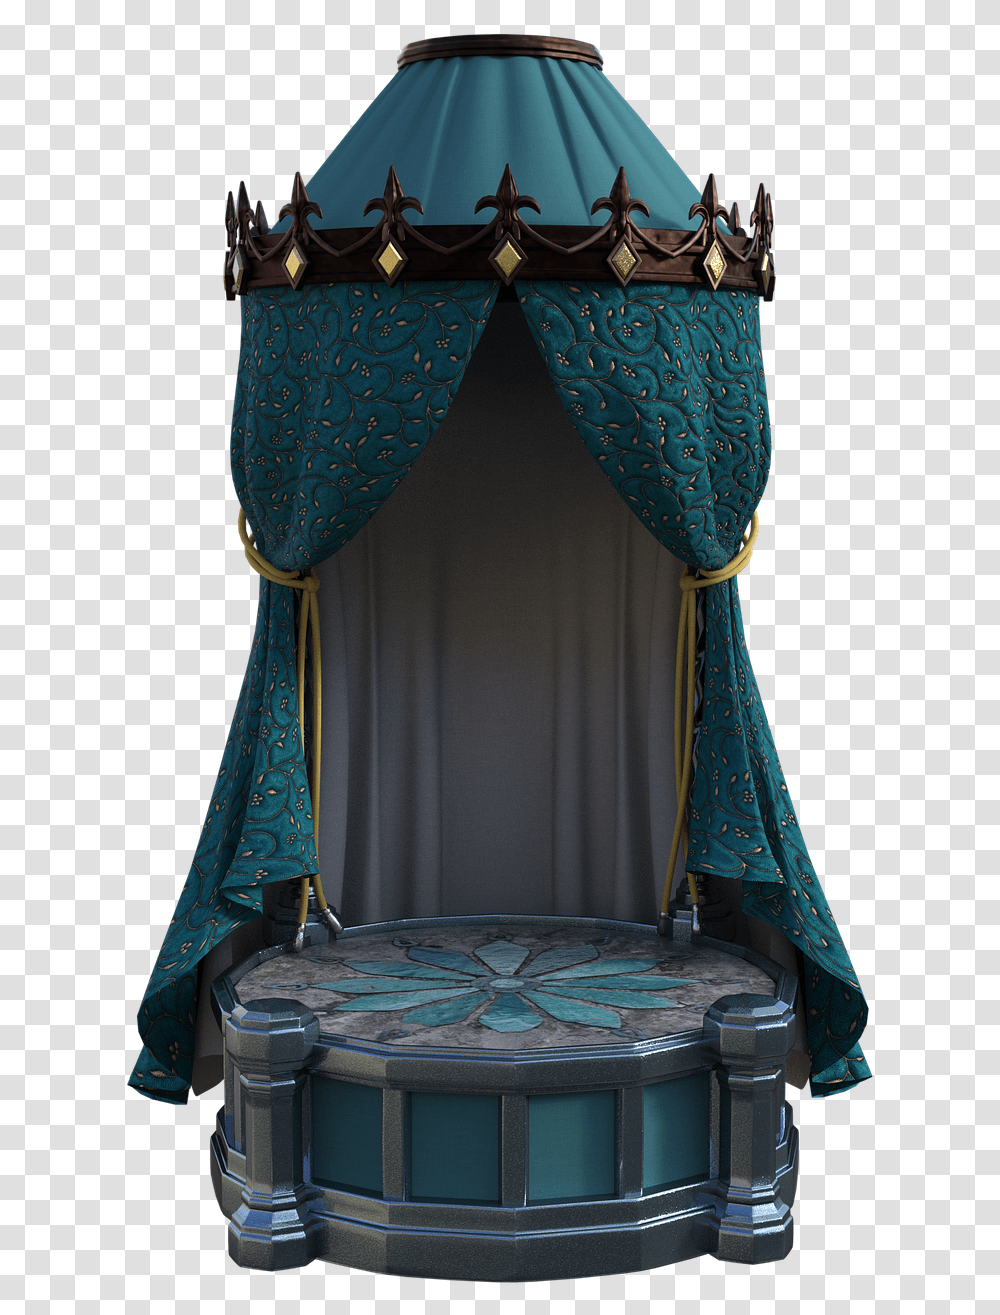 Chair, Furniture, Cradle, Mosquito Net, Bed Transparent Png